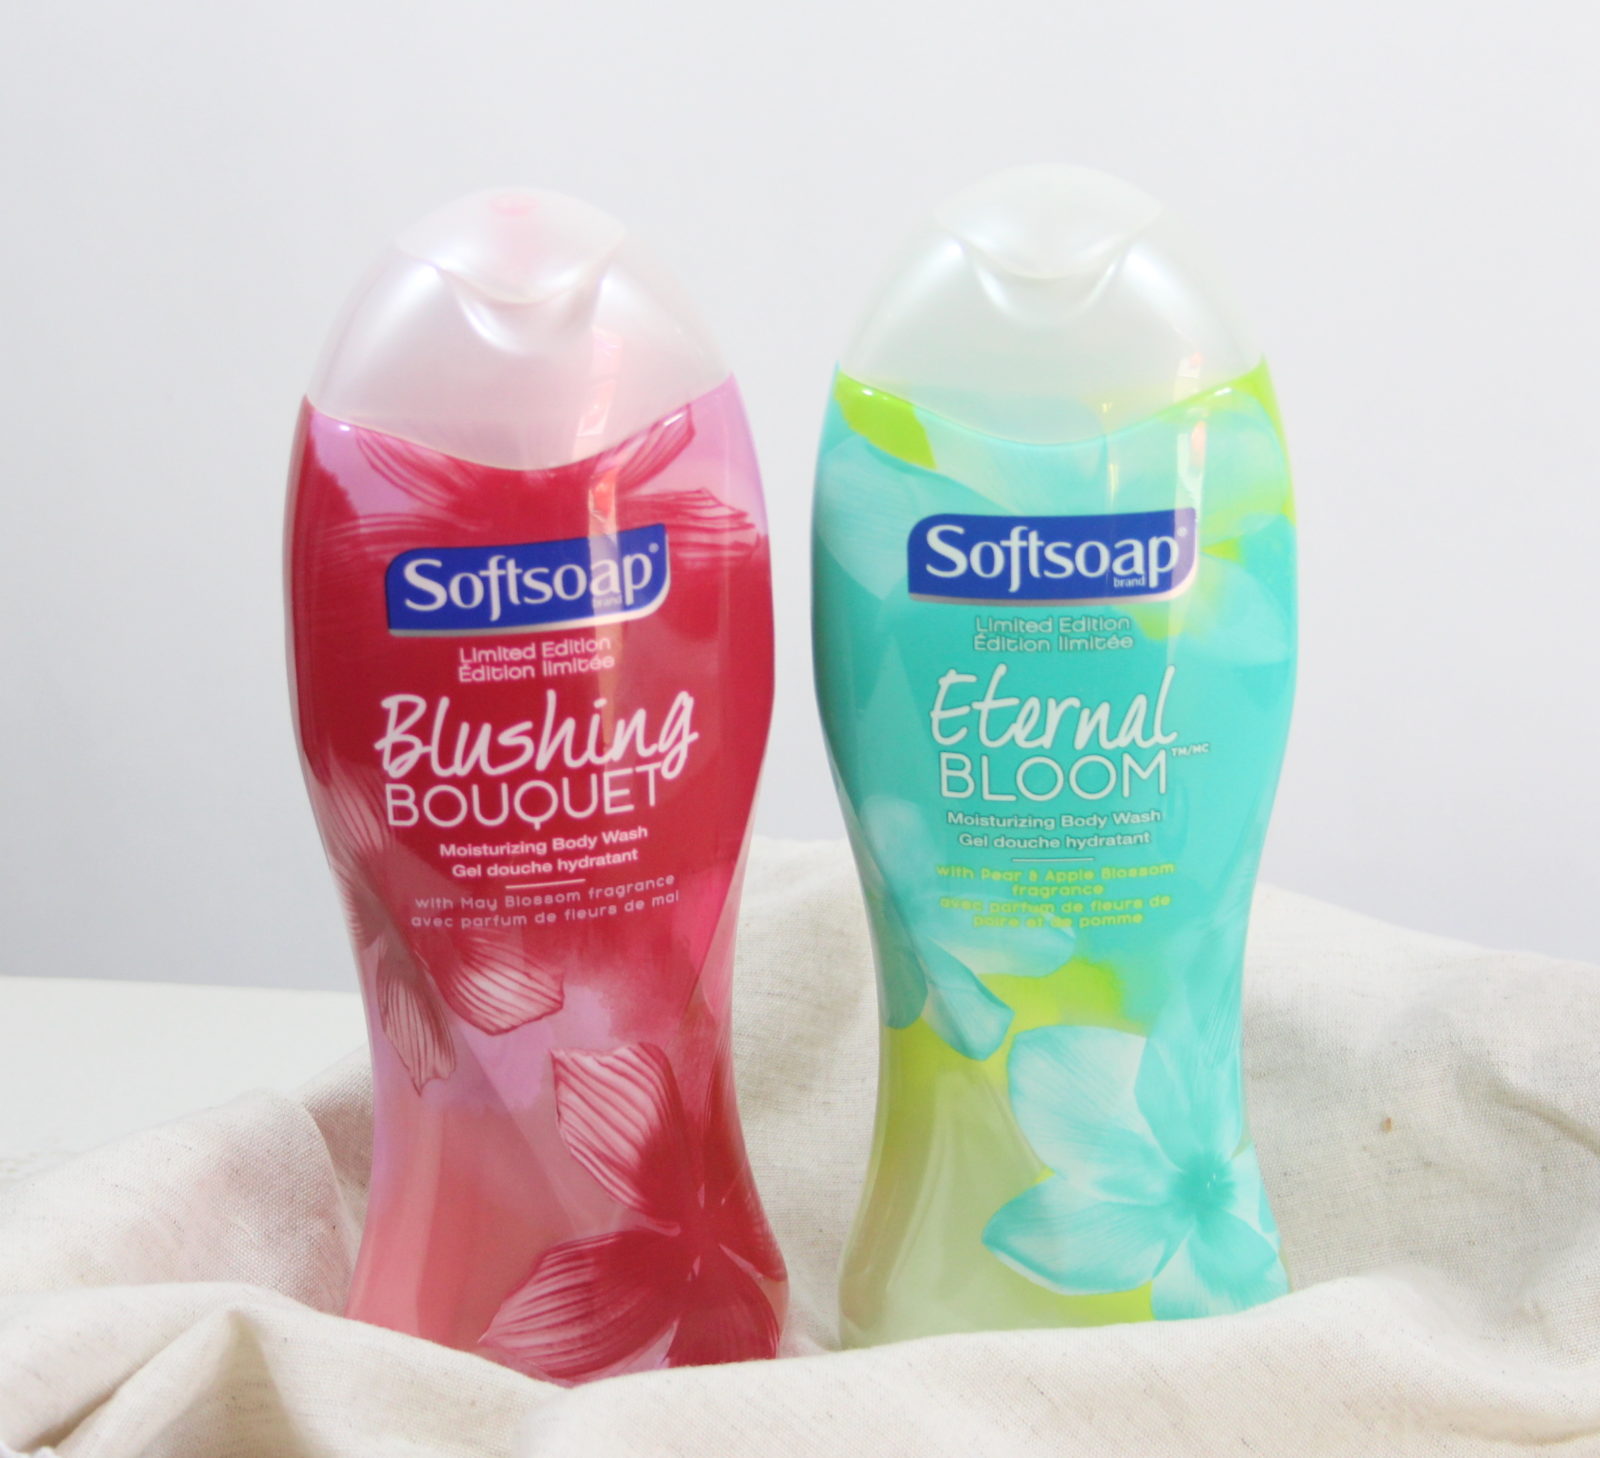 Softsoap Limited Edition Moisturizing Body Wash – Blushing Bouquet and Eternal Bloom